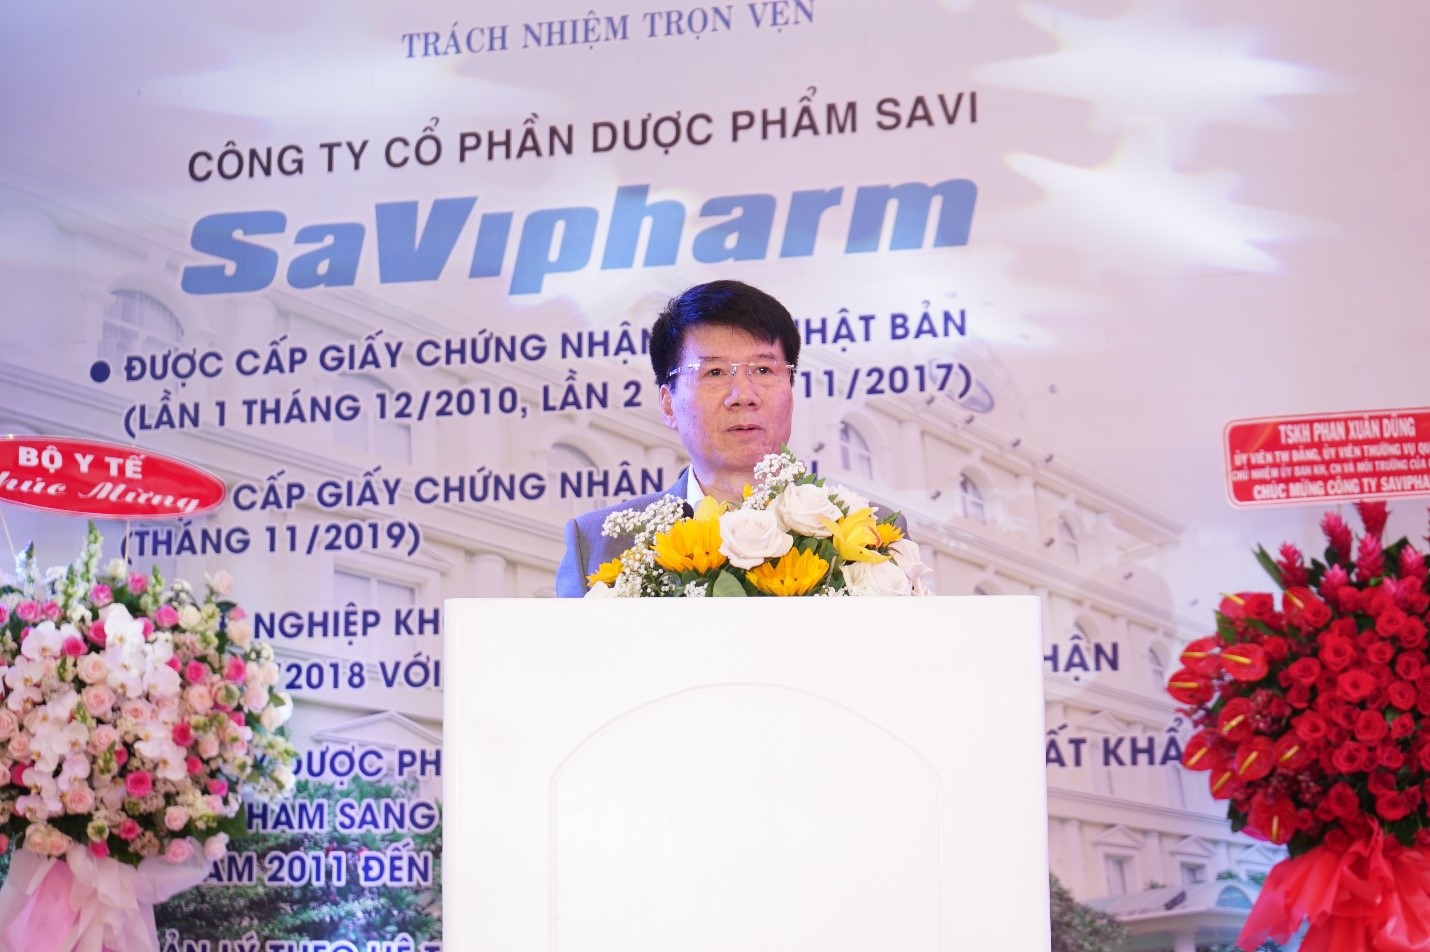 Dr. Truong Quoc Cuong, Deputy Minister of Health, speaks speaks at a ceremony granting SaVipharm an EU Good Manufacturing Practice certificate in Ho Chi Minh City on January 7, 2020. Photo: SaVipharm